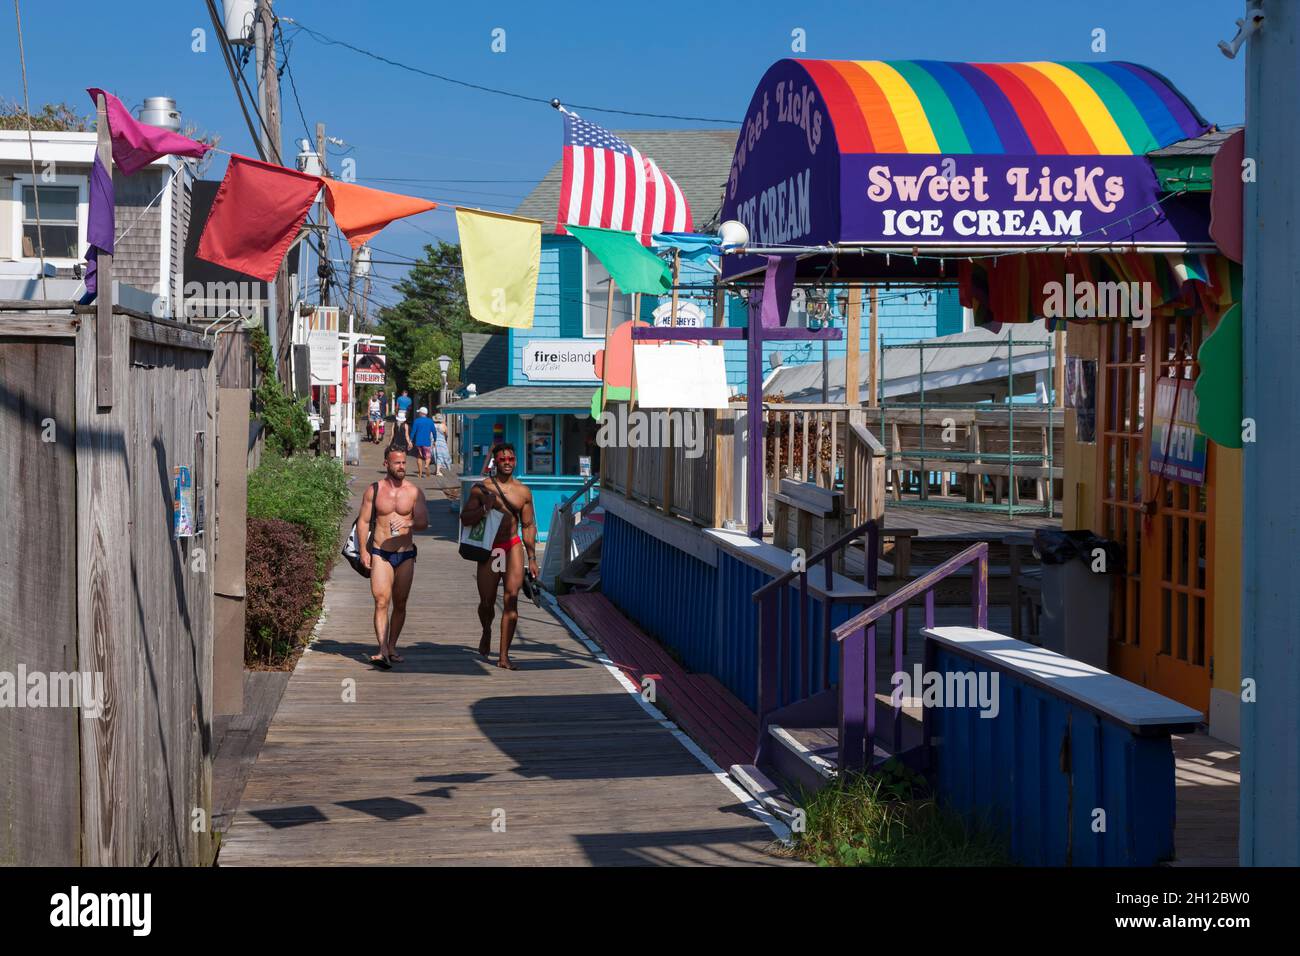 Shirtless men pass restaurants and shops in the center of town in Cherry Grove,  on Fire Island, Suffolk County, New York, USA. Stock Photo